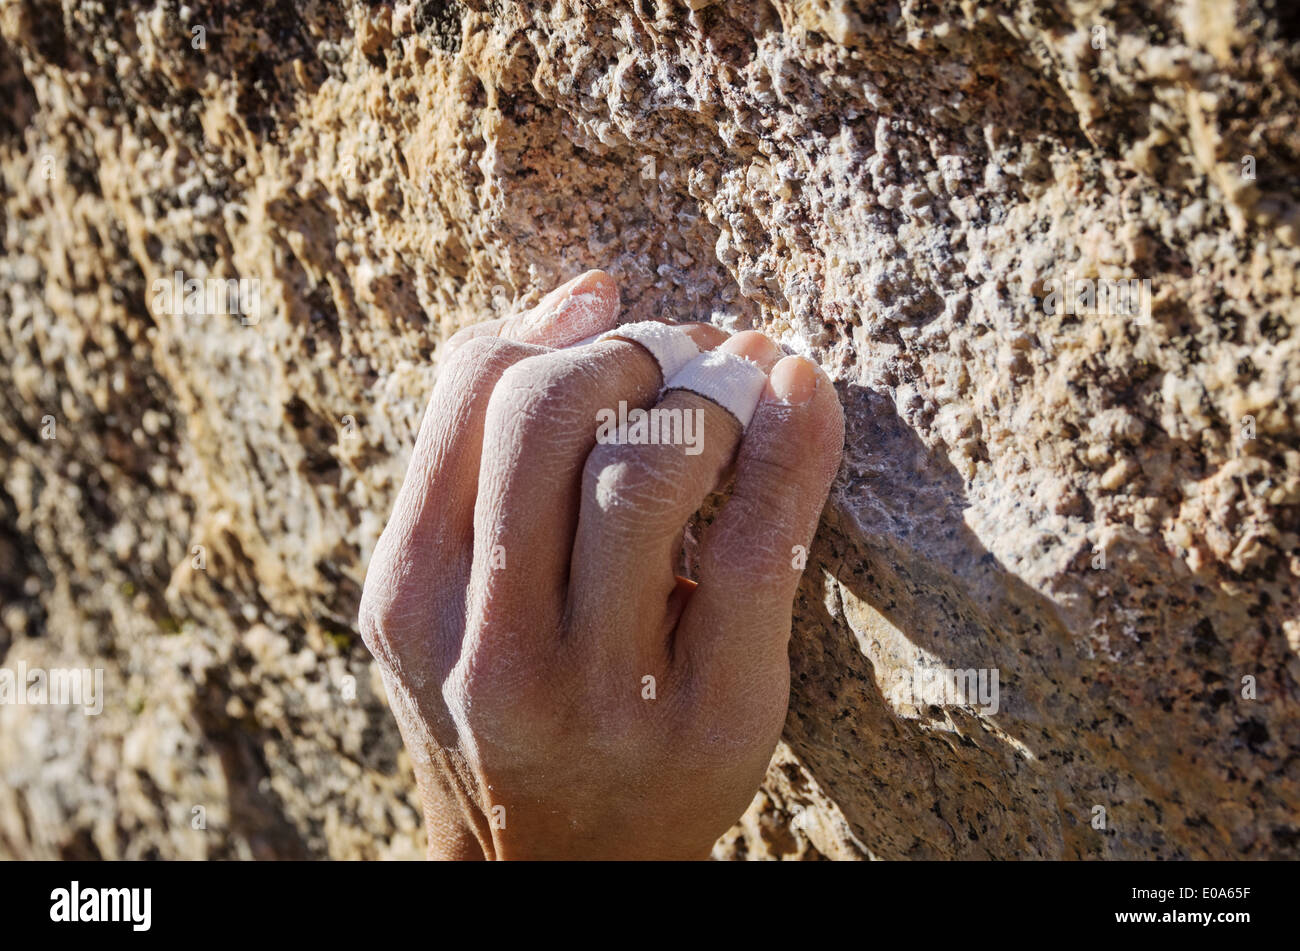 the hand of a woman climber in a crimp grip grabbing a small granite rock climbing hold Stock Photo